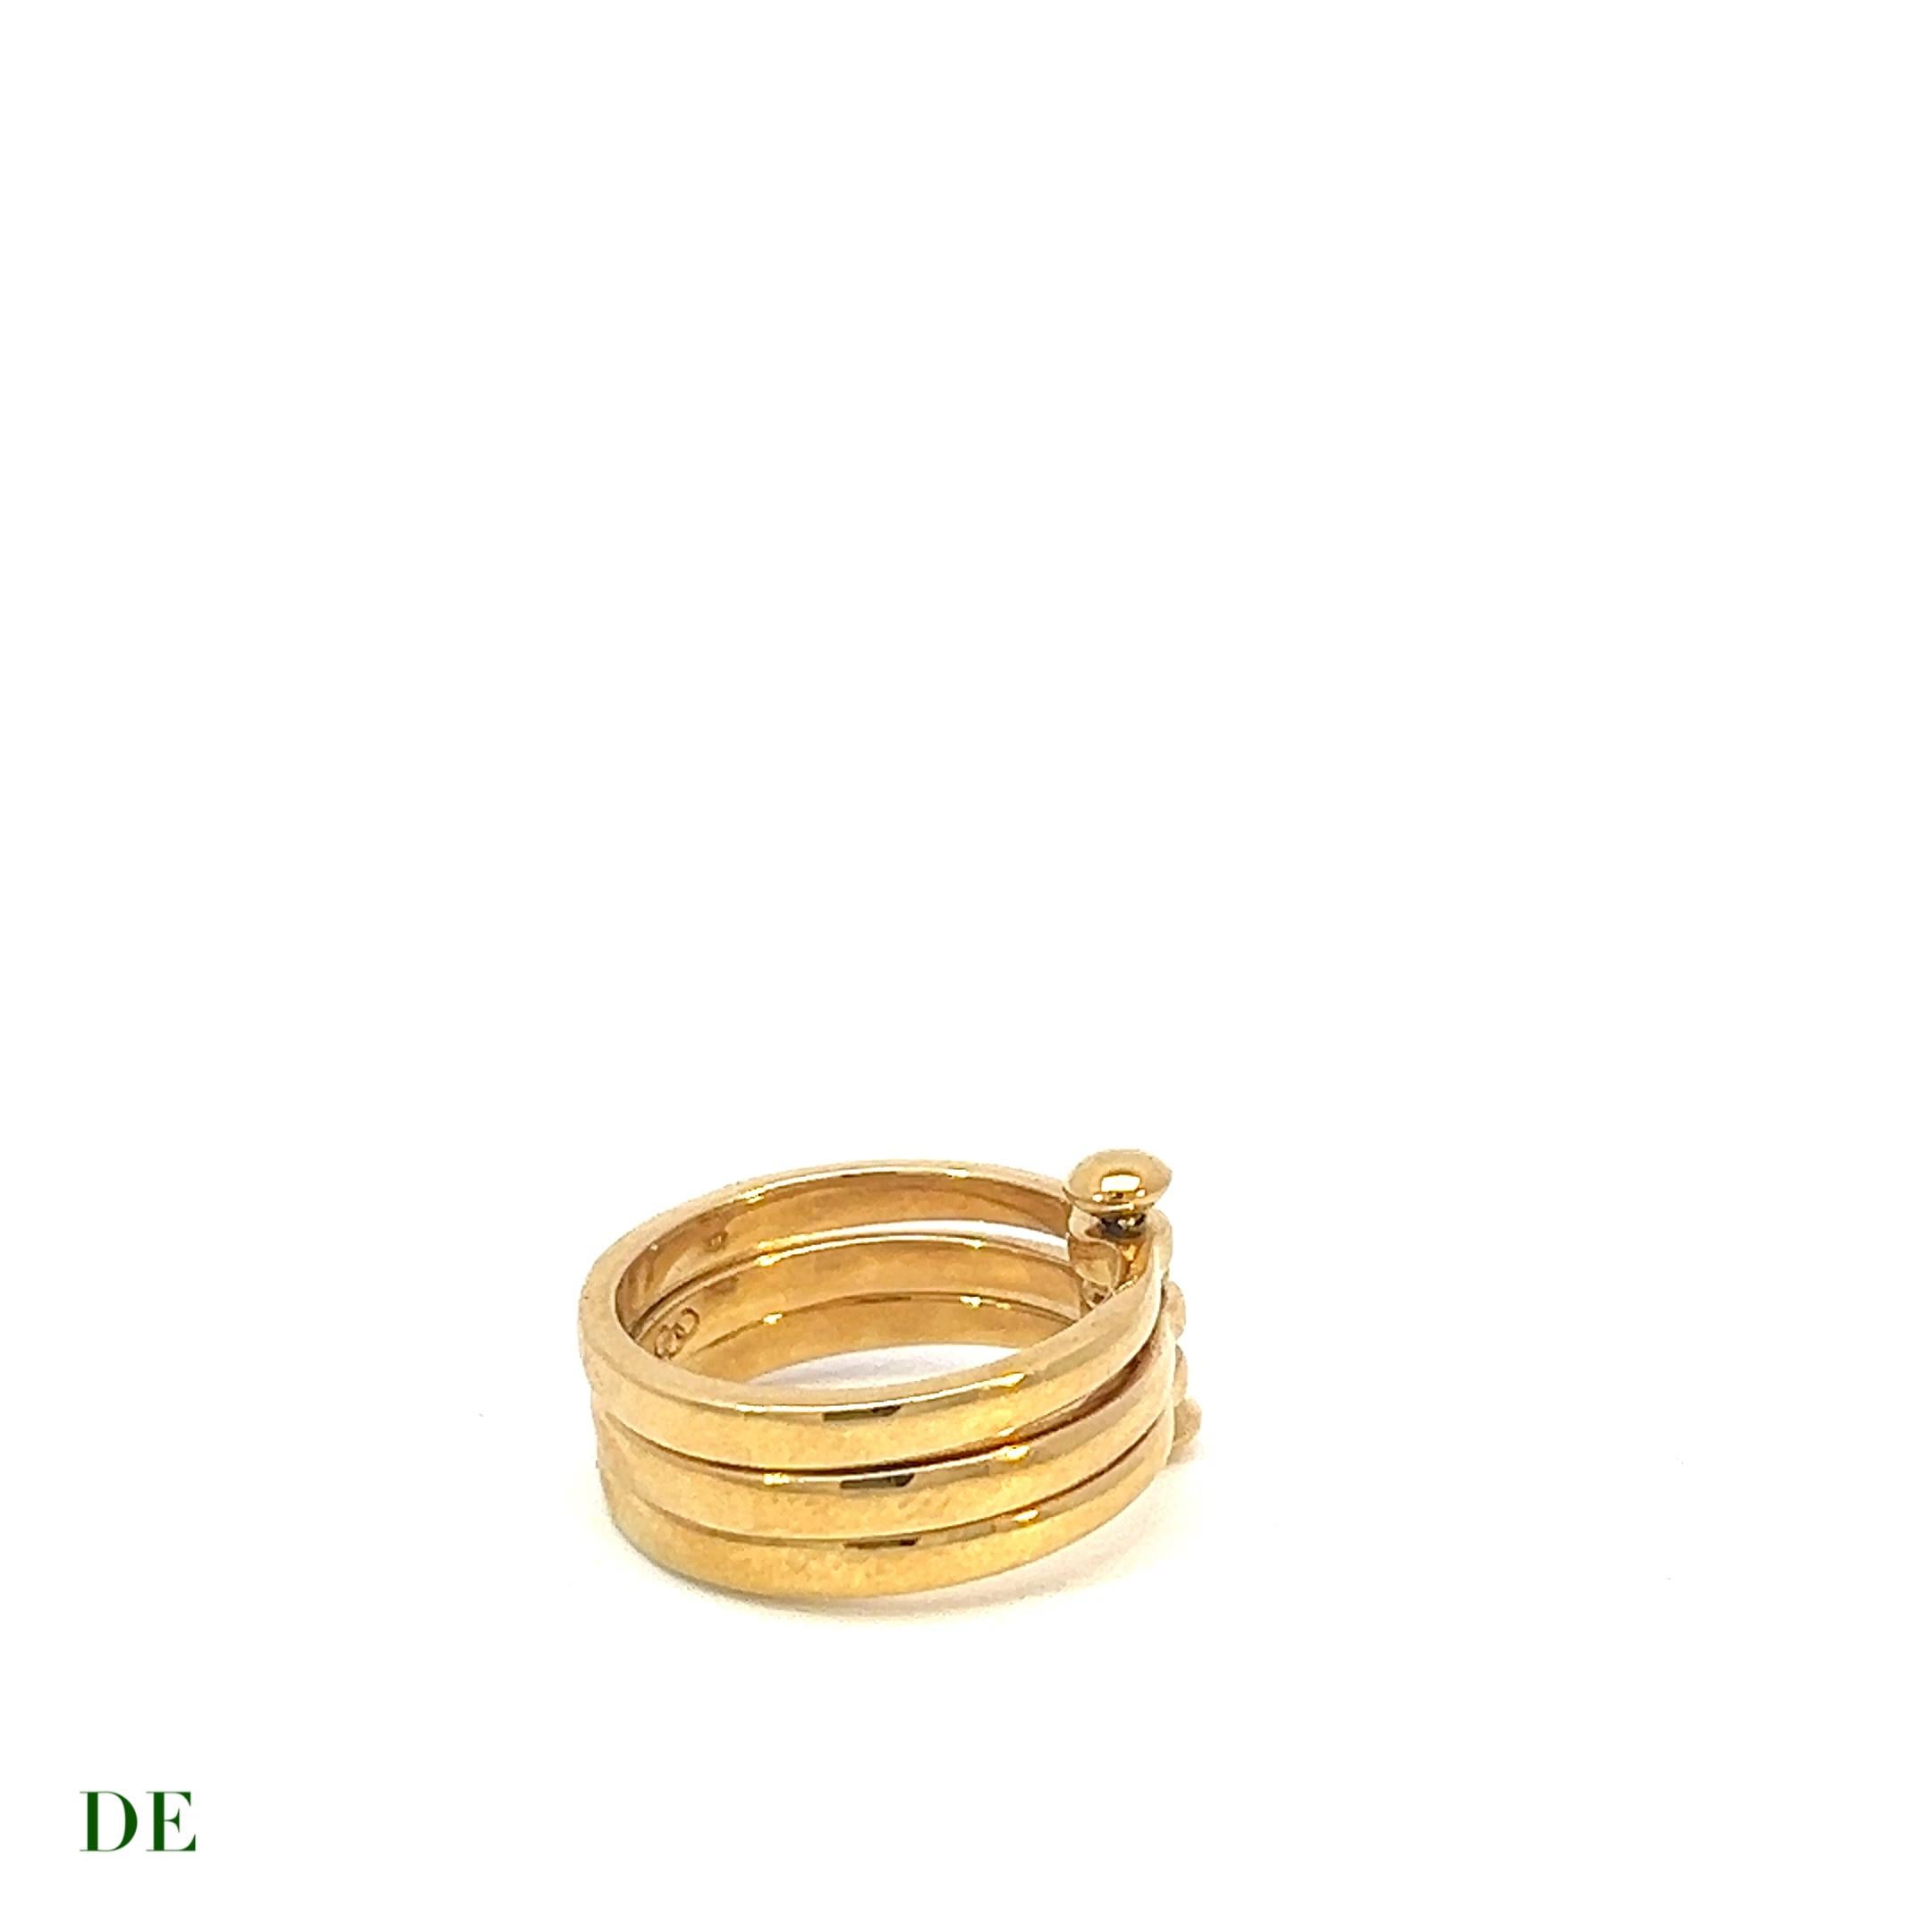 Irresistible Charm: Very Rare Discontinued Links of London 18k Yellow Gold Friendship Ring

Discover the allure of this very rare and coveted Links of London 18k Yellow Gold Friendship Ring. Crafted with exquisite artistry, this ring embodies a